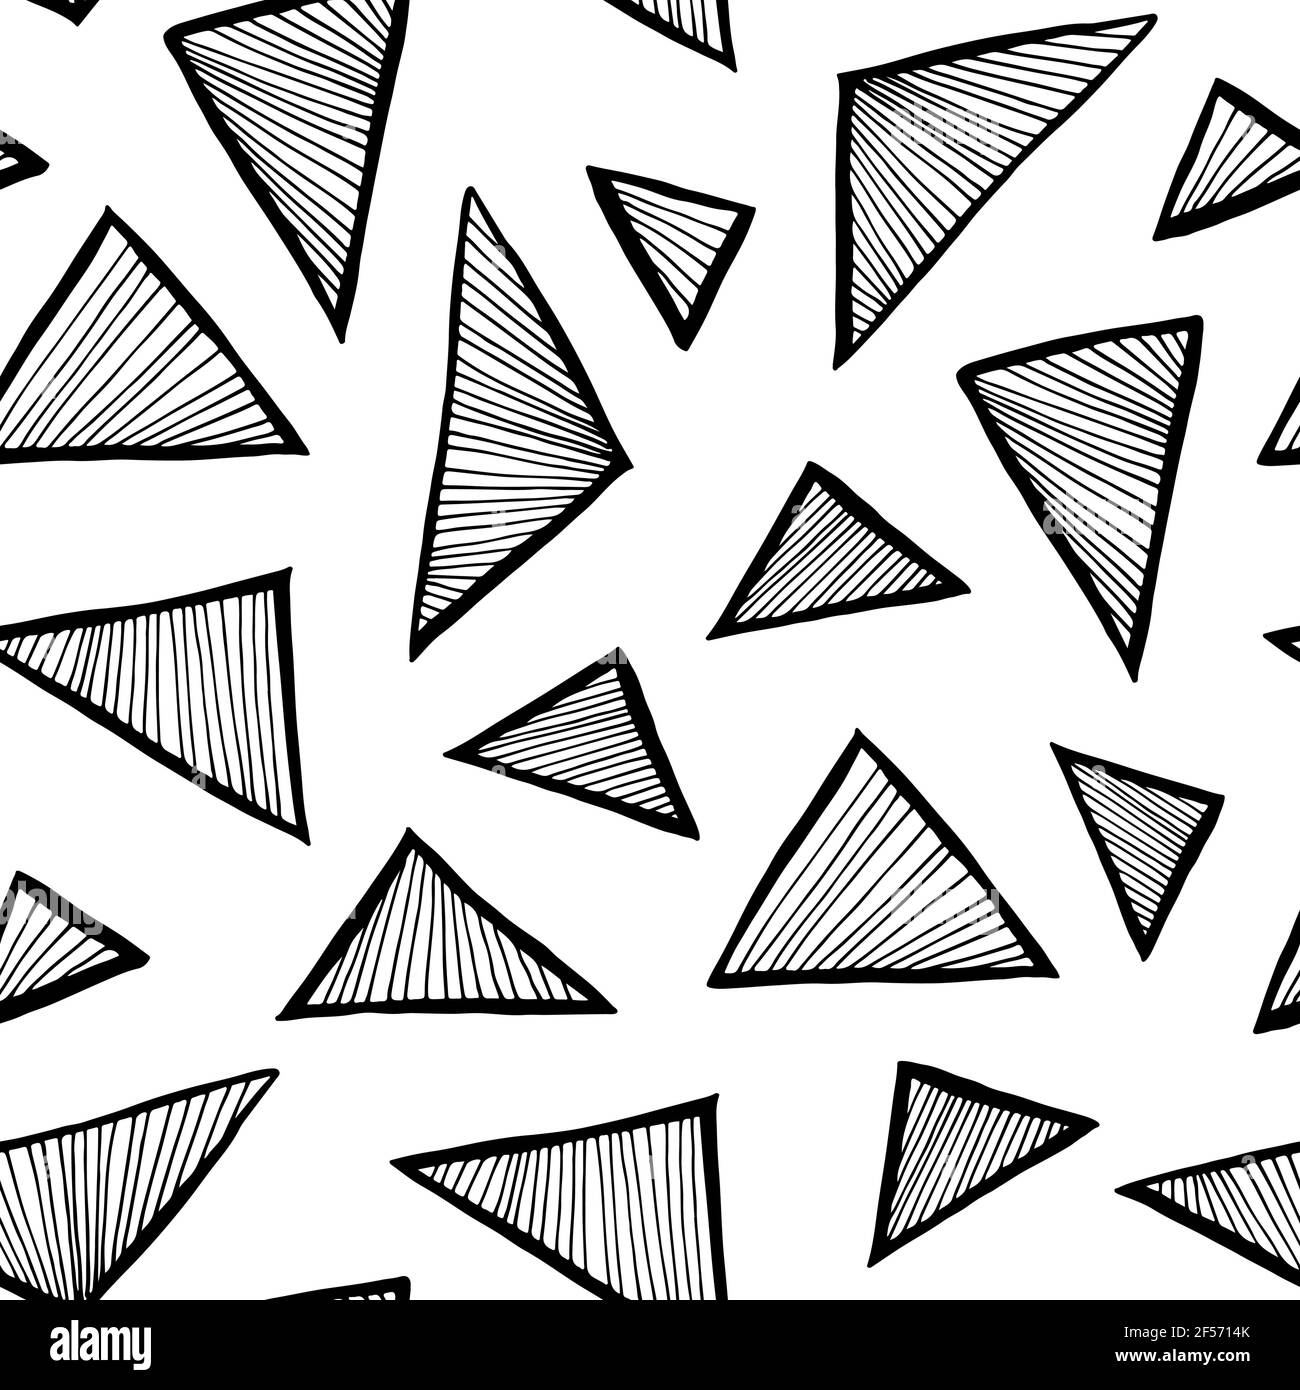 https://c8.alamy.com/comp/2F5714K/triangle-seamless-vector-pattern-simple-doodle-hand-drawn-background-2F5714K.jpg